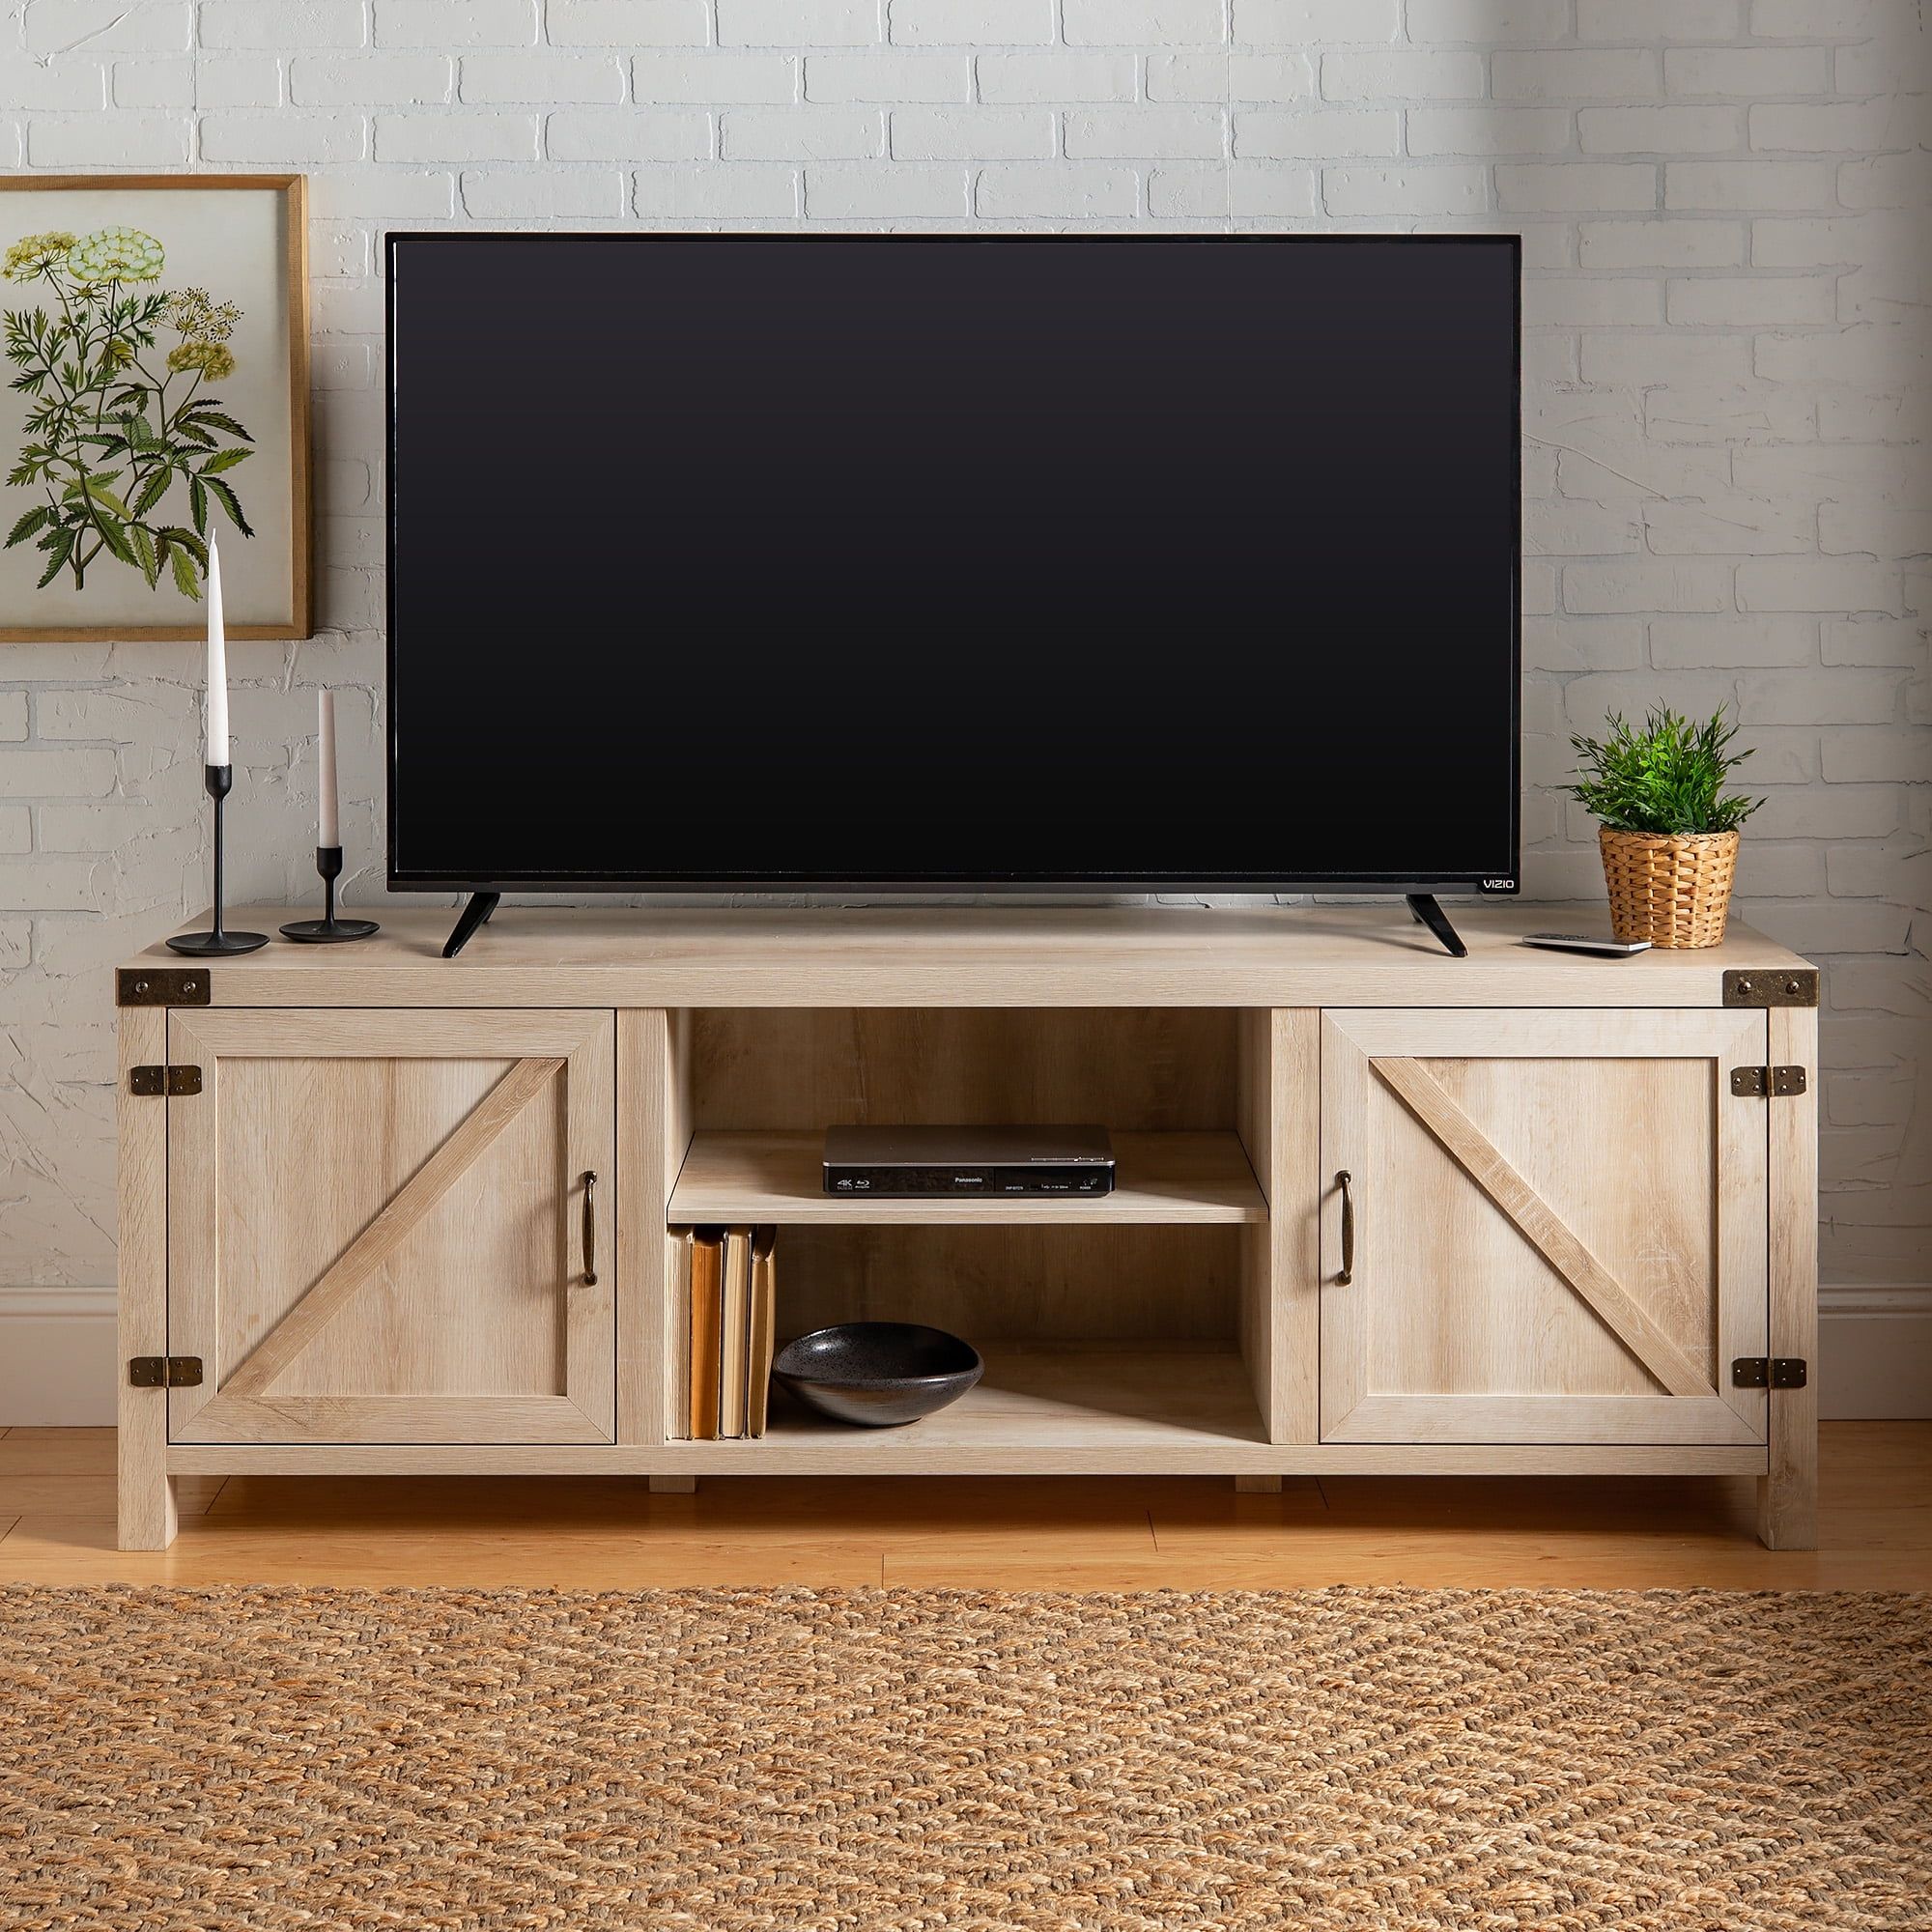 Woven Paths Farmhouse Barn Door Tv Stand For Tvs Up To 80", White Oak In Farmhouse Rattan Tv Stands (Gallery 10 of 20)